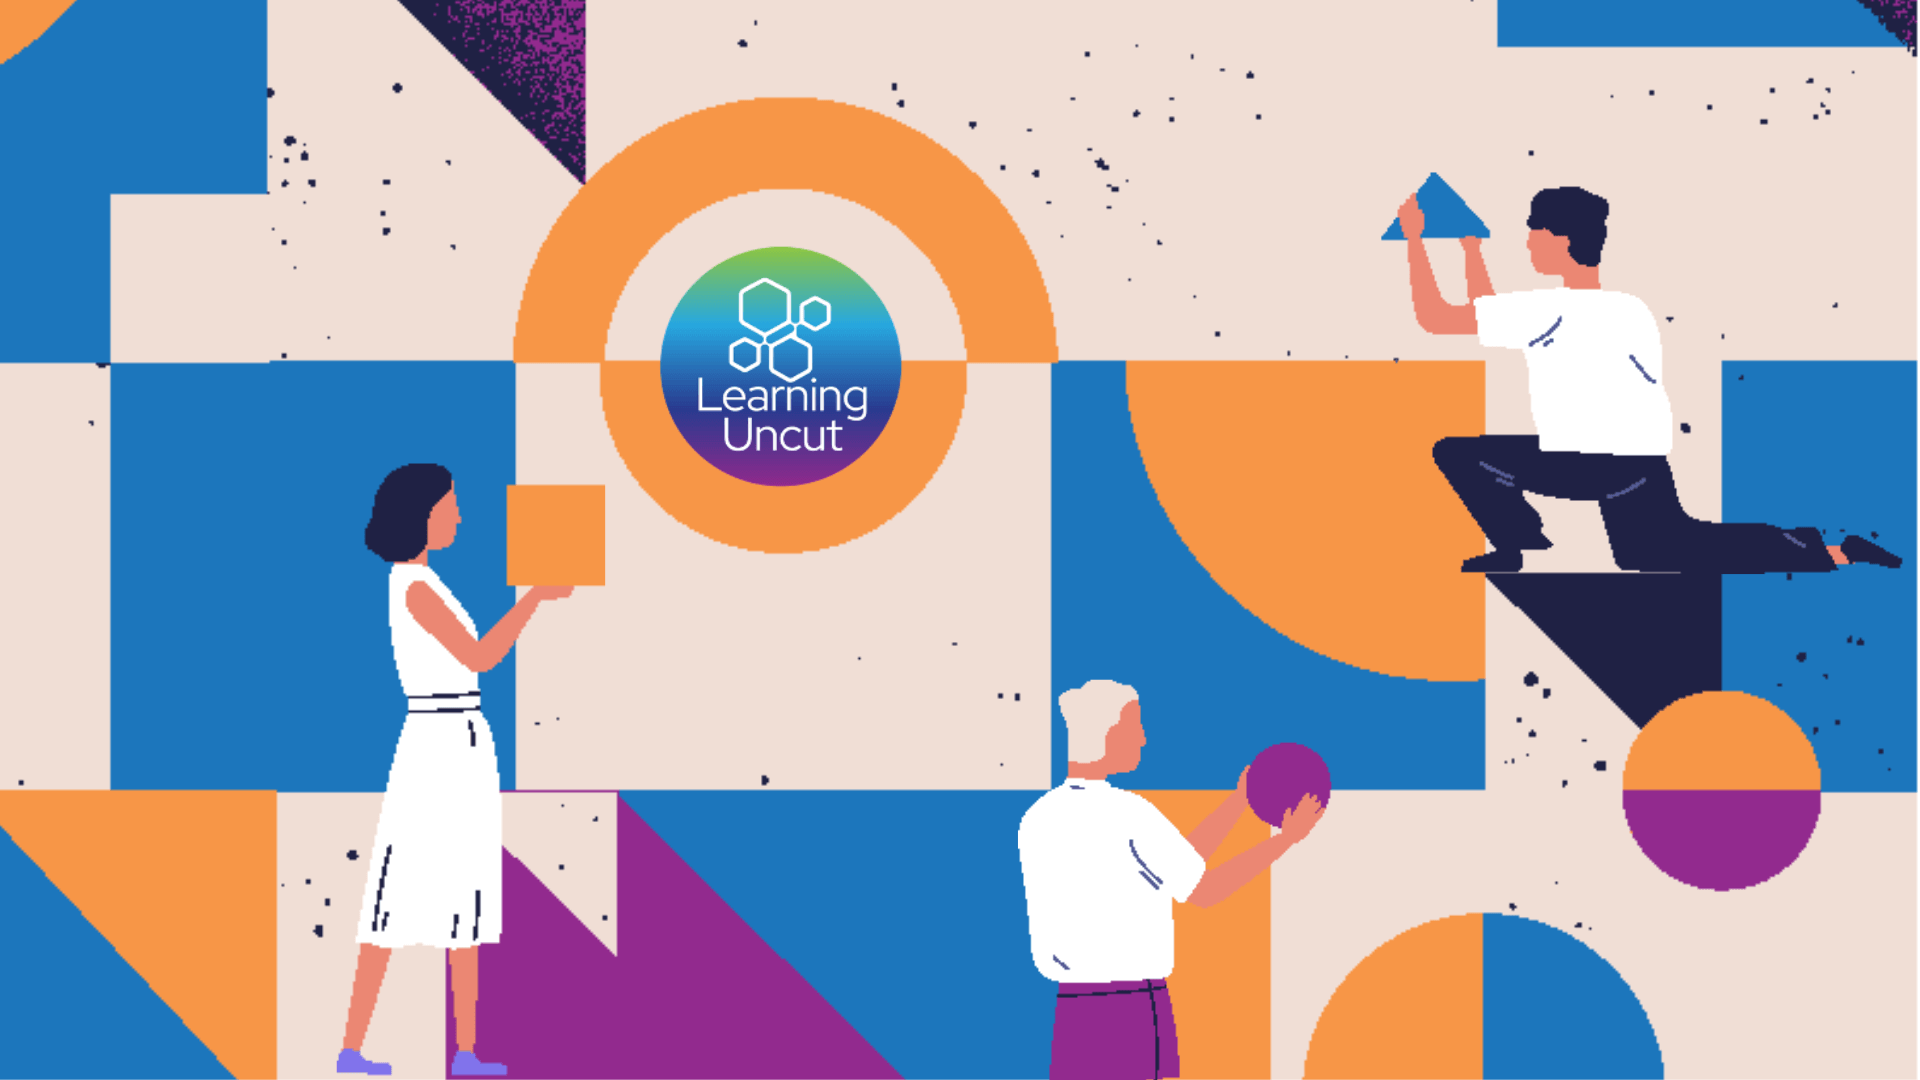 Illustration of people placing shapes around the Learning Uncut logo